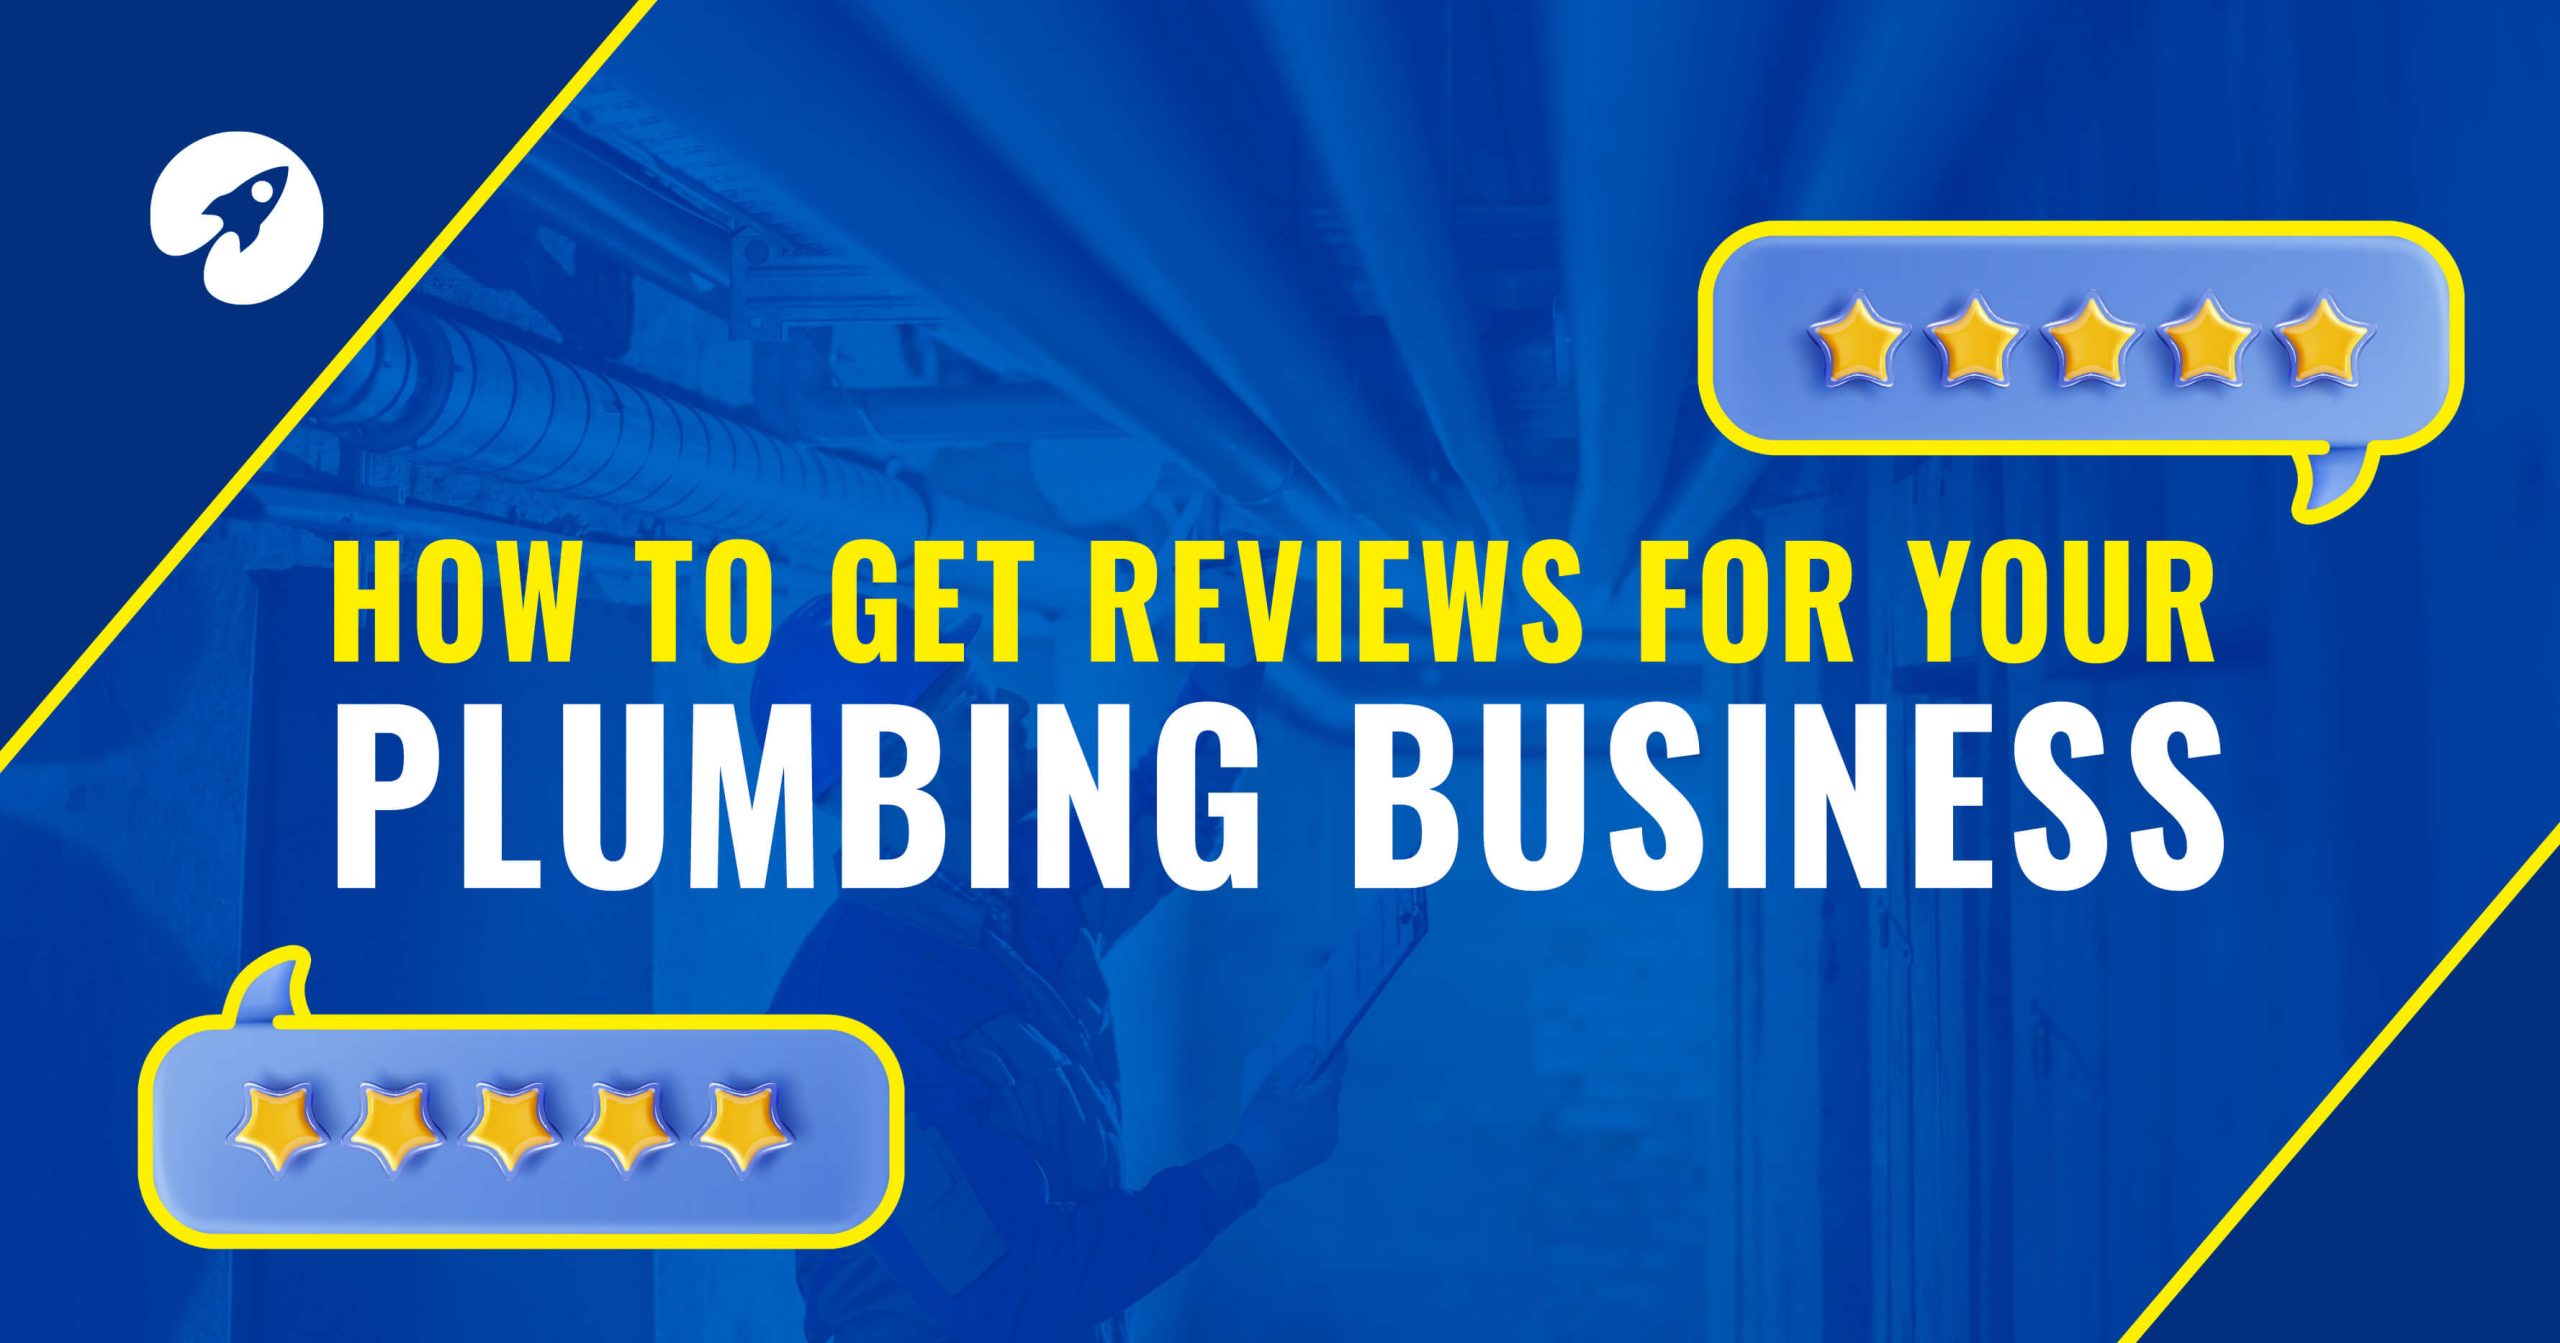 How to get online reviews for your plumbing business